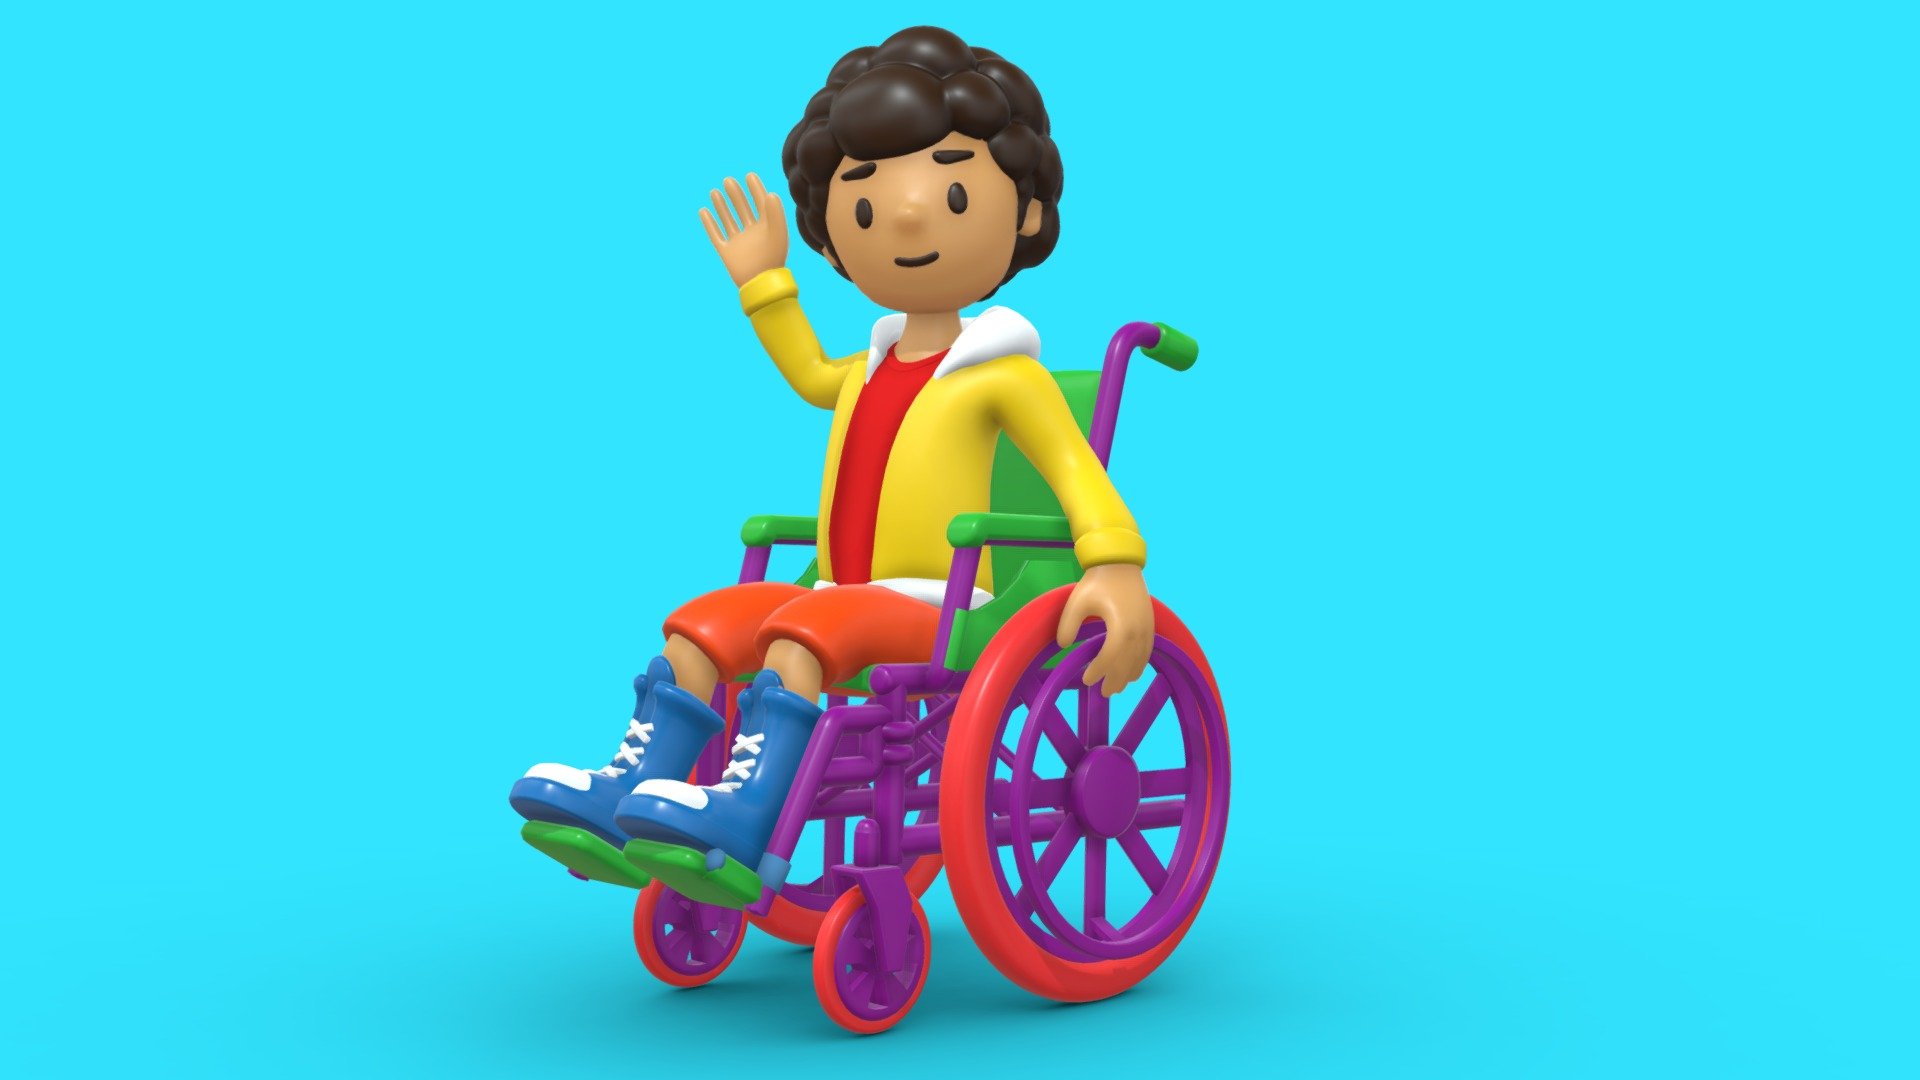 This 3D model was developed as a trial for a freelance project, showcasing a cartoon character in a wheelchair. The character's design is modeled after a clay sculpture, boasting playful details and an upbeat expression 3d model